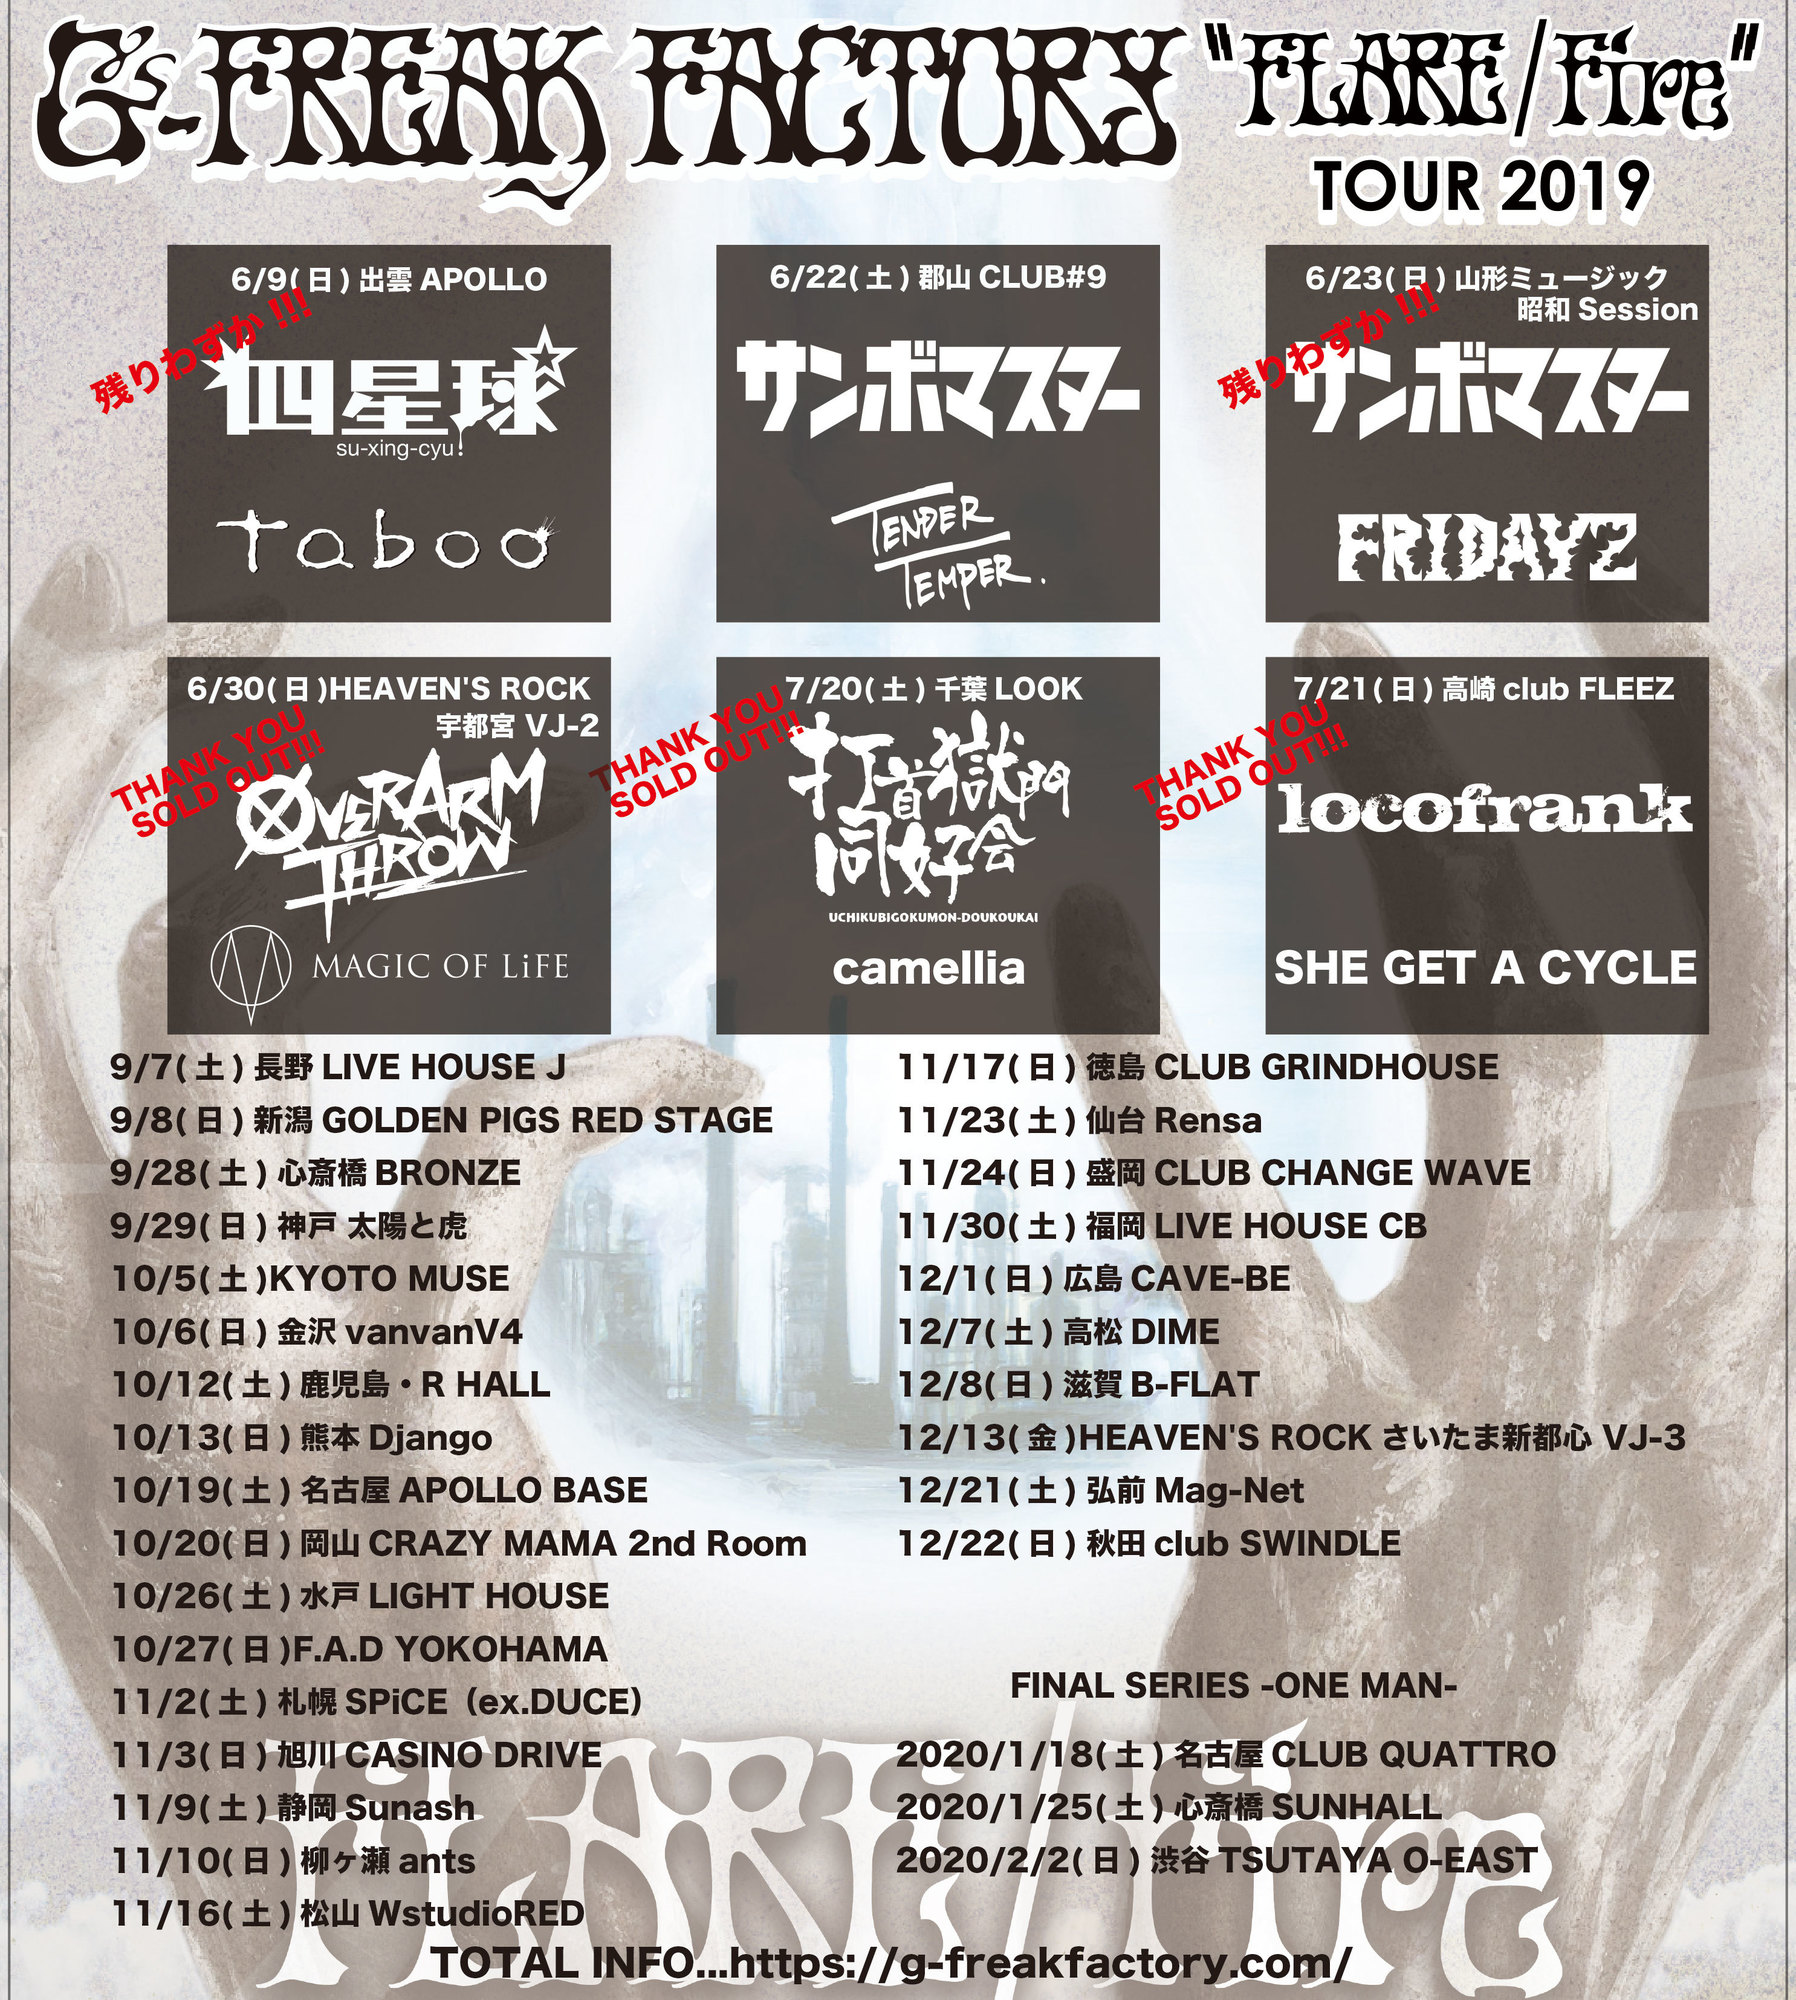 Flare Fire Tour 19の第2弾ゲストバンドに打首獄門同好会 Locofrankが決定 G Freak Factory Official Website